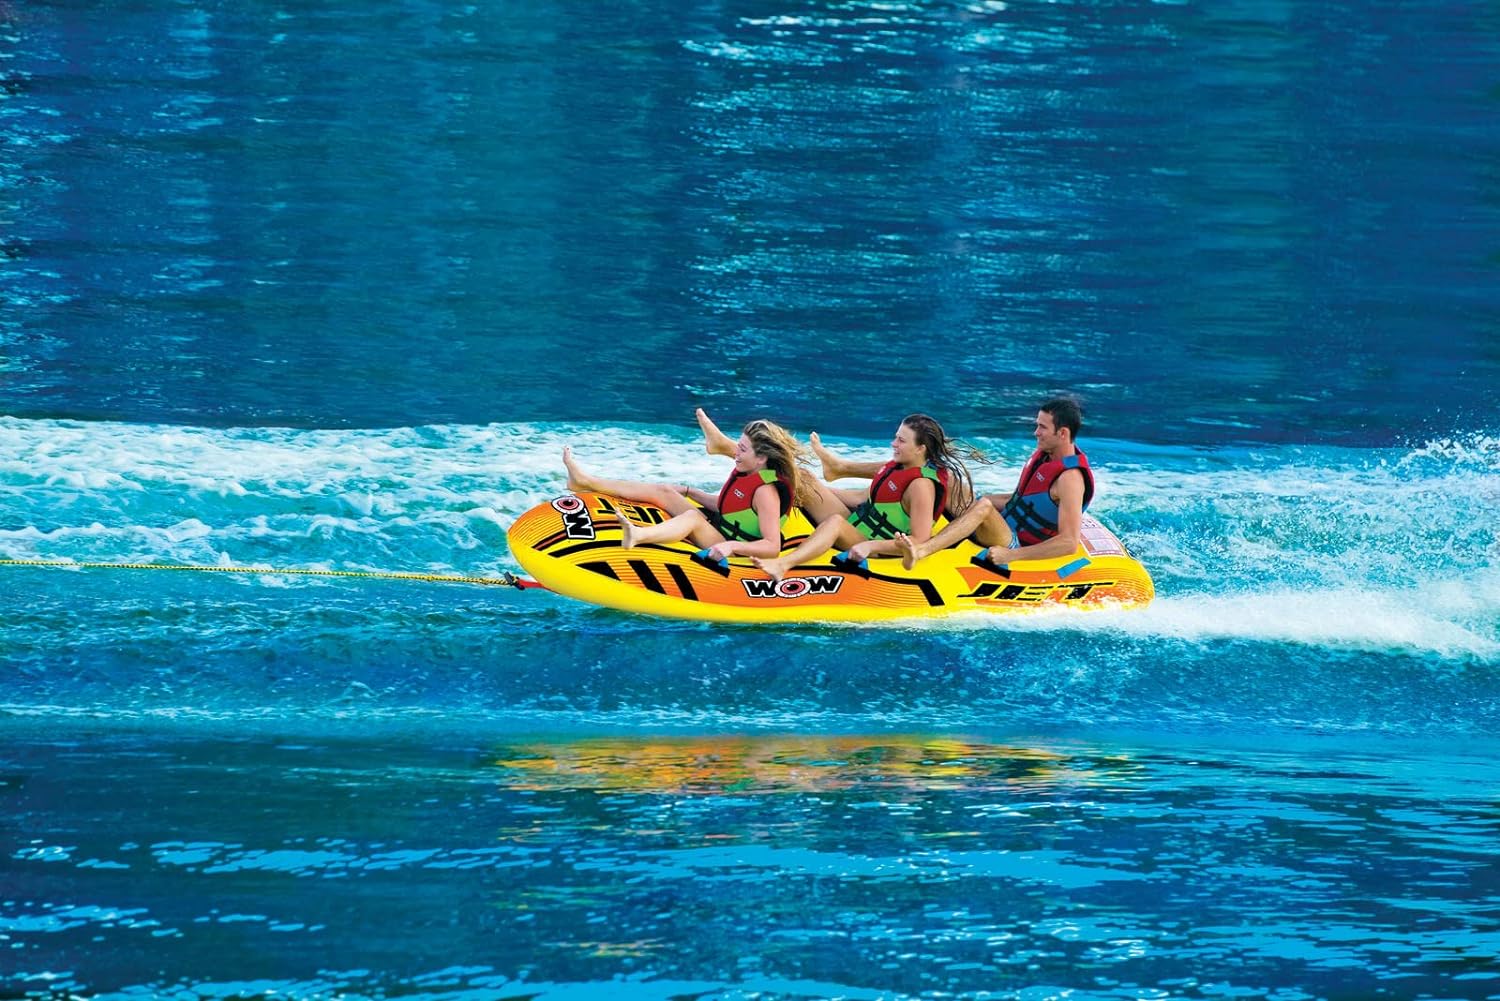 WoW World of Watersports, Jet Boat Towable